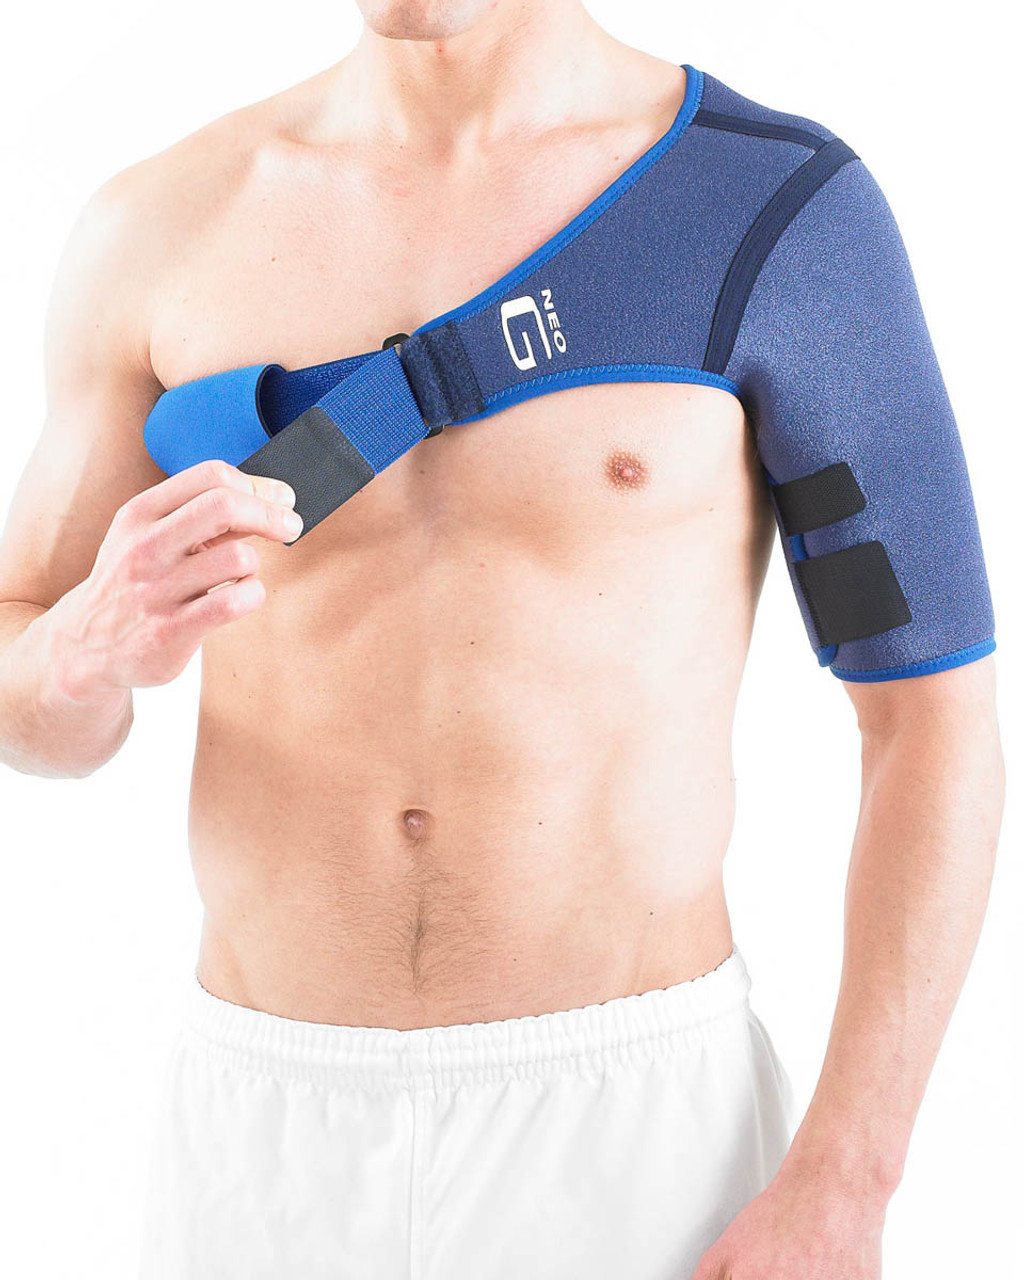 Neo G Shoulder Support | Physical Sports First Aid